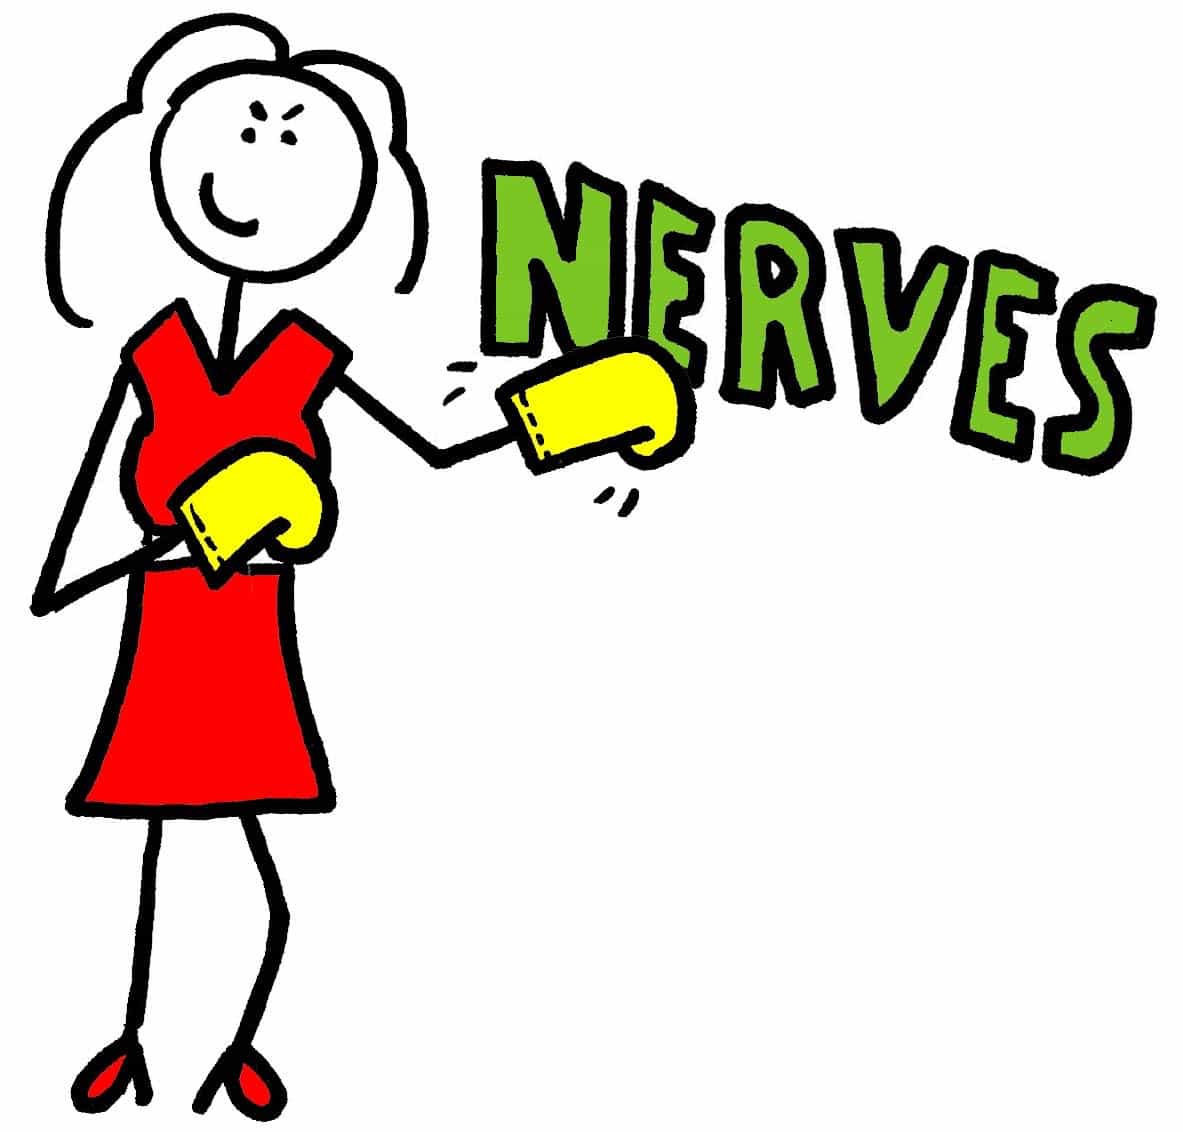 Public Speaking Nerves: What¬ to love?